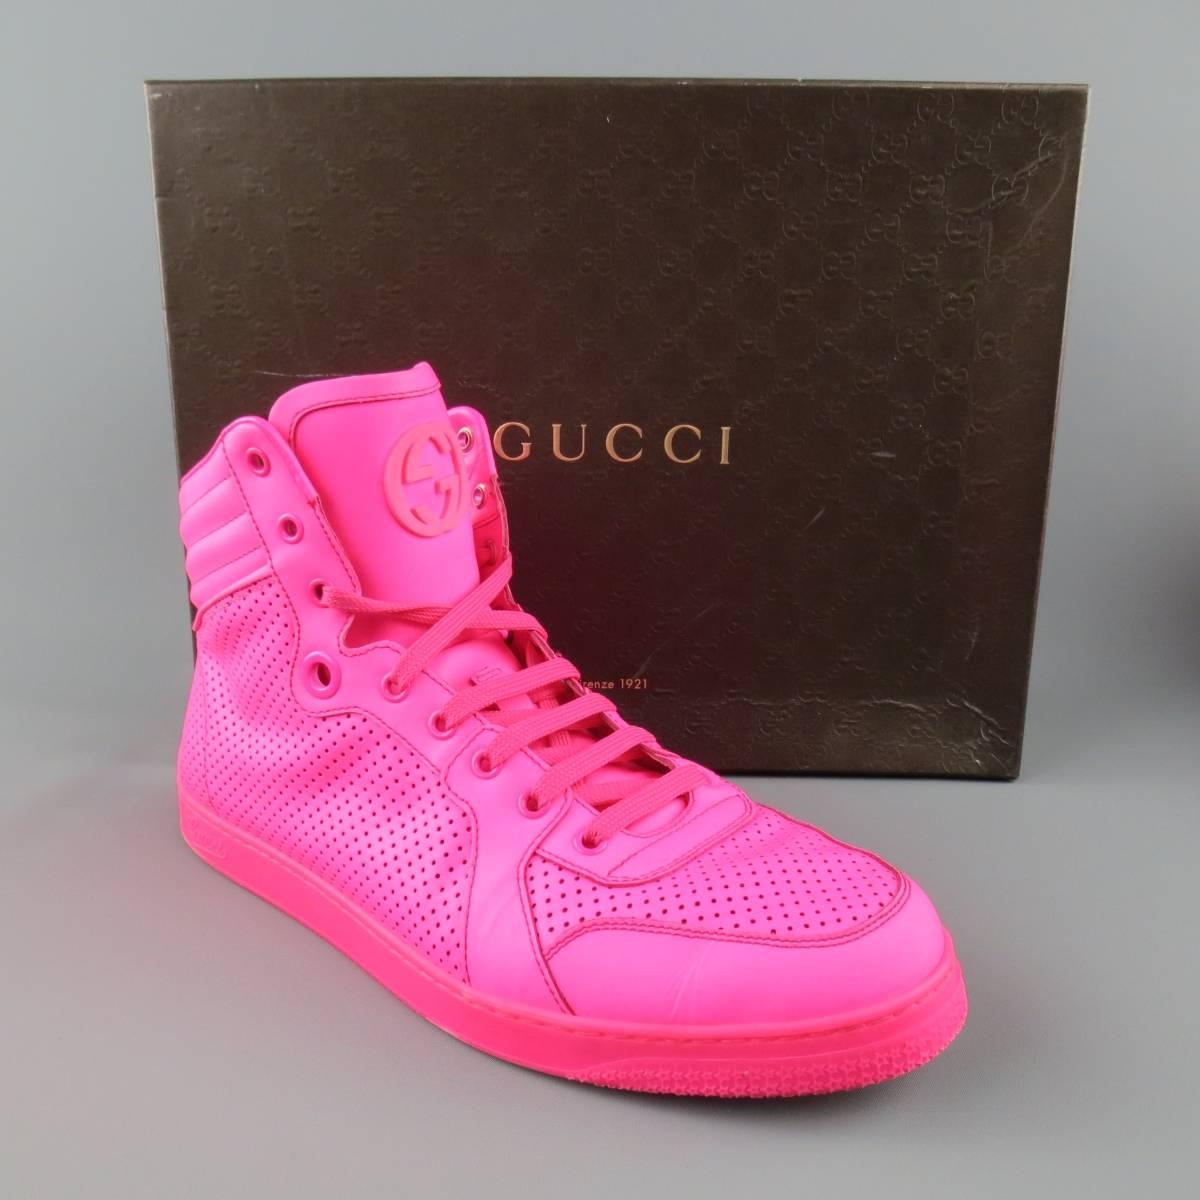 Men's GUCCI Size 11 Neon Pink Perforated Leather High Top CODA Sneakers 1